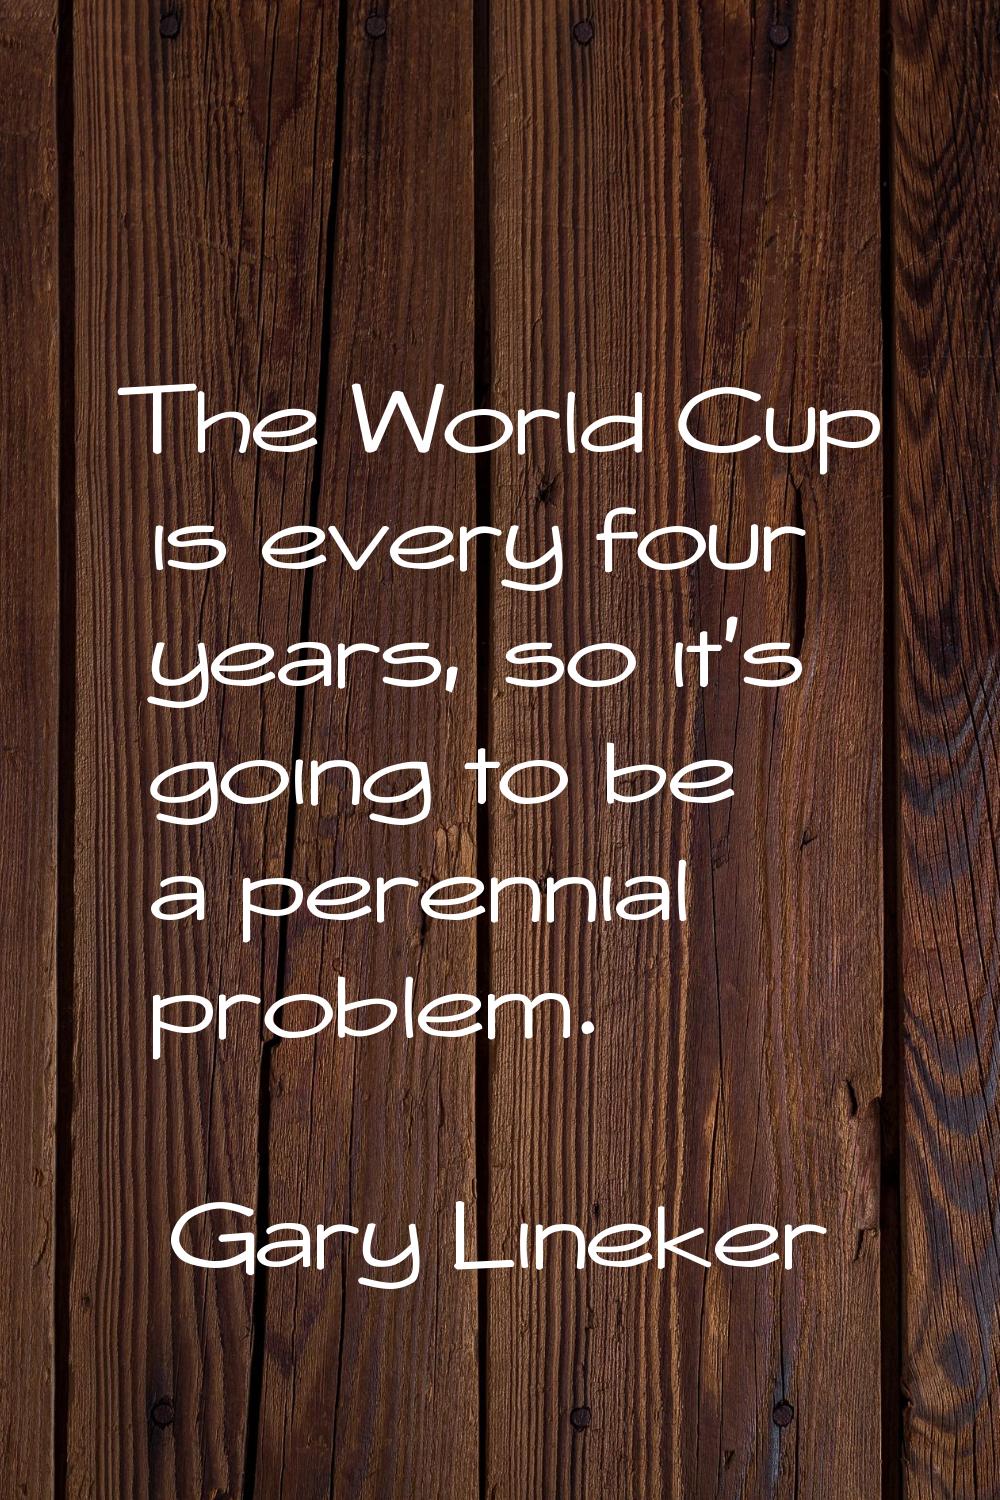 The World Cup is every four years, so it's going to be a perennial problem.